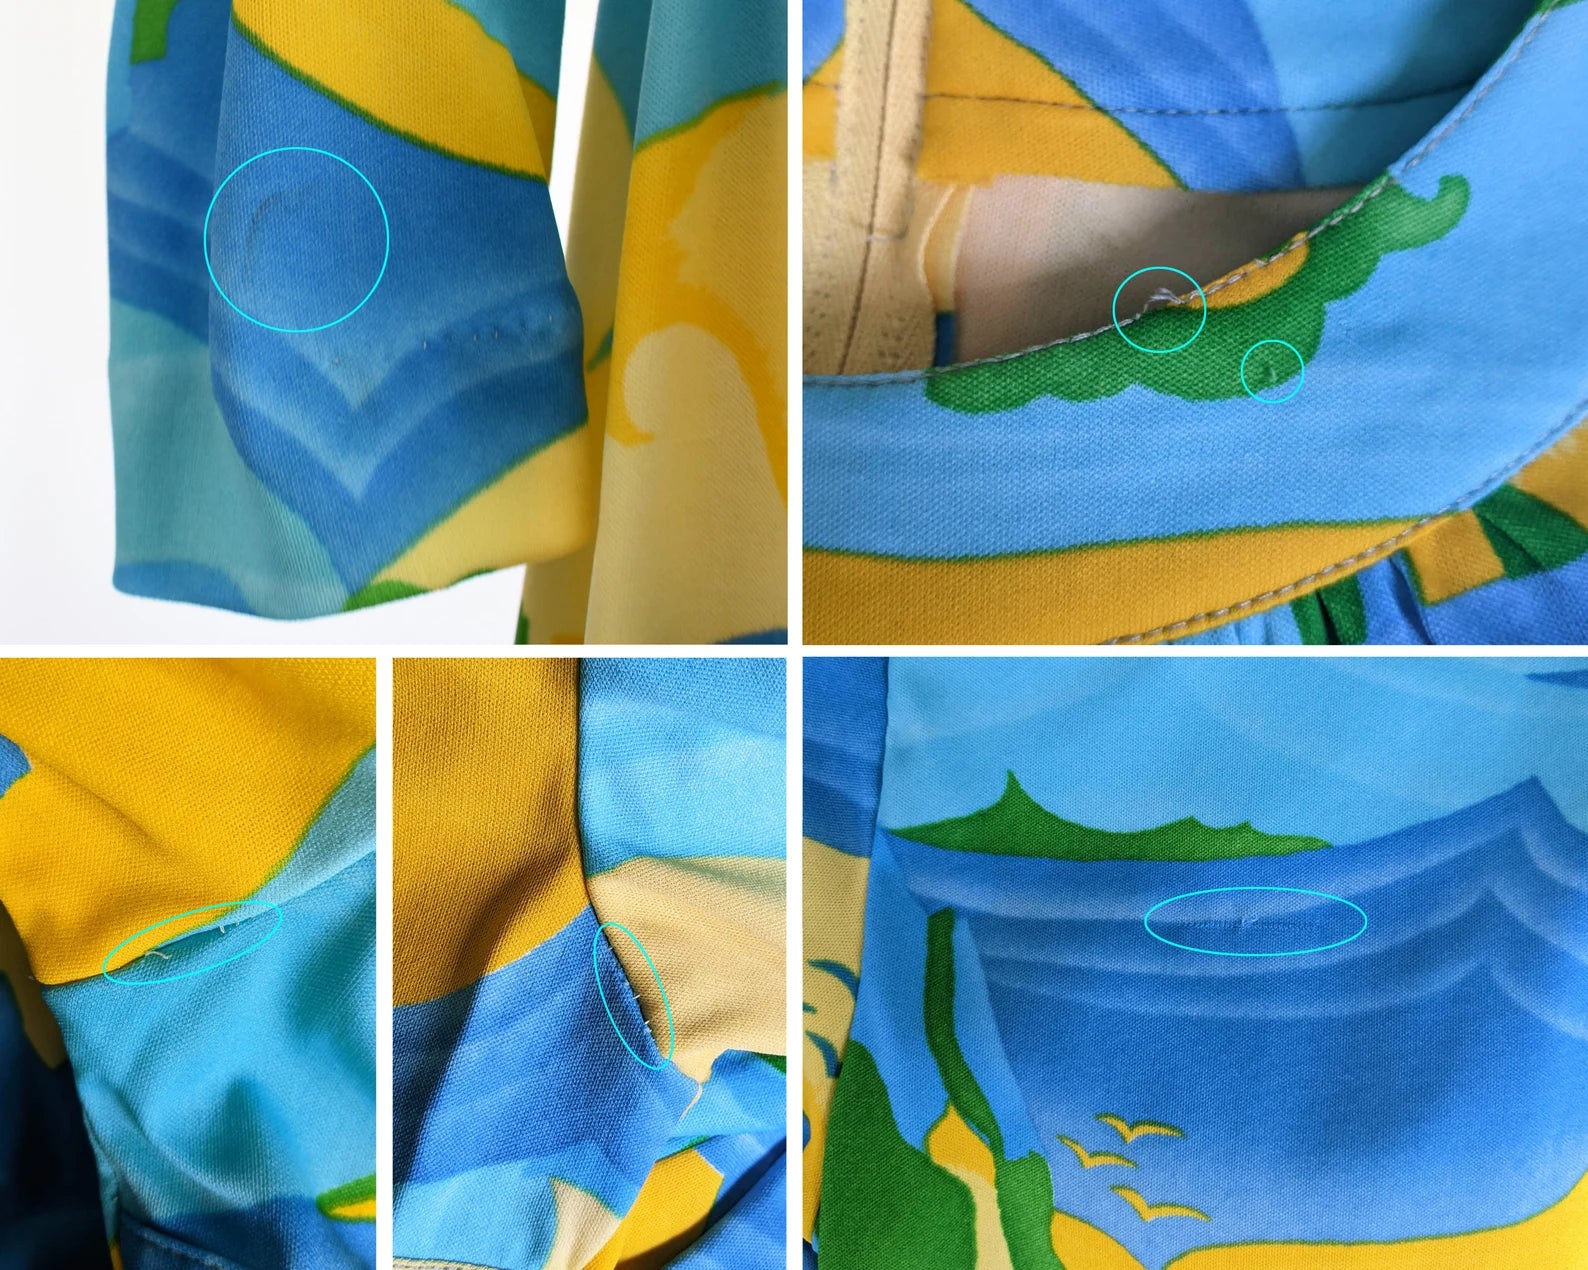 Close up of small flaws on the dress. Clockwise from left to right: A small mark on the cuff, a small pull and a break in the thread on the collar, a small pull on the back shoulder, and some random stitching in the underarms.